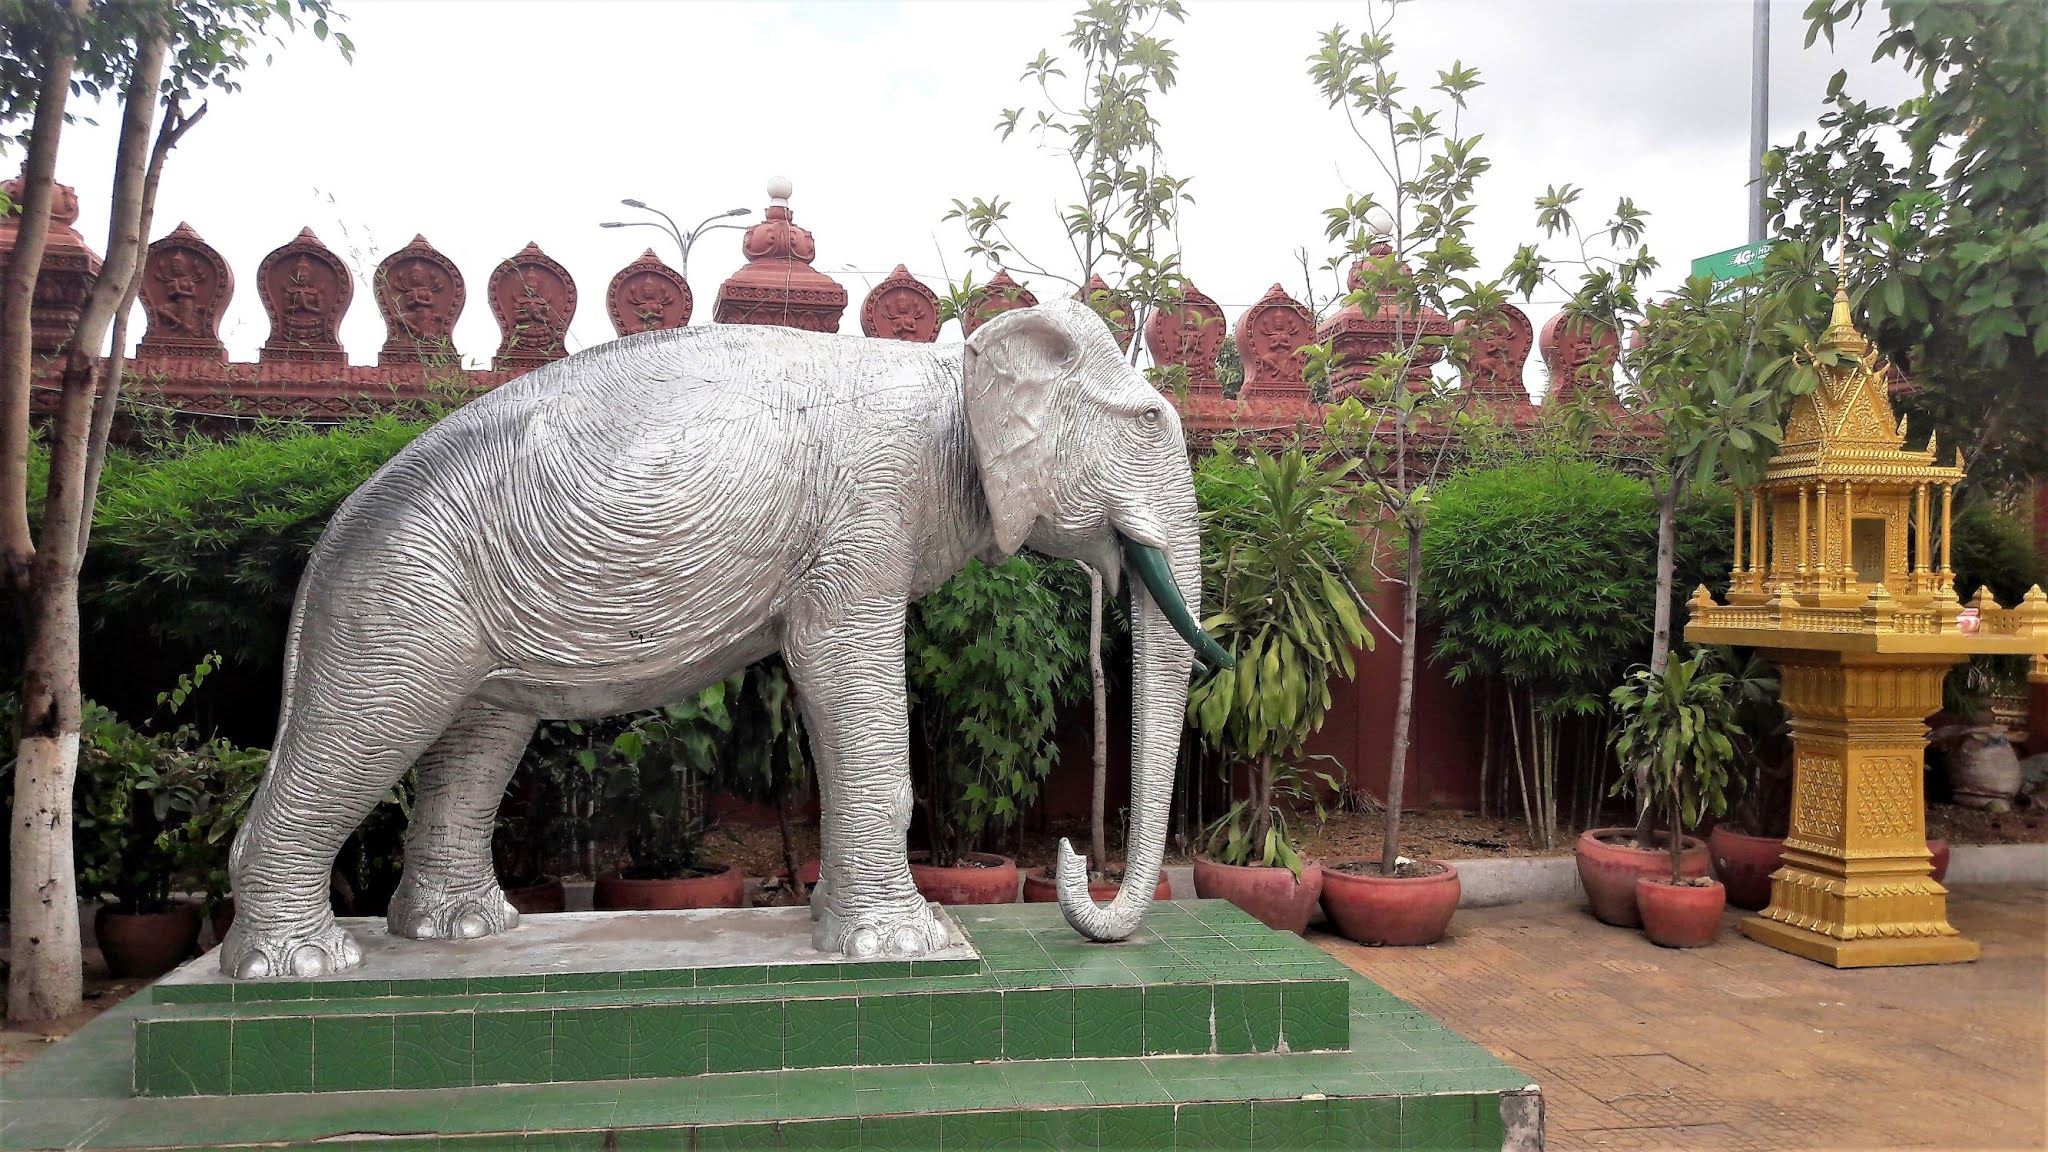 Statue of an elephant in the courtyard of Wat Ounalom